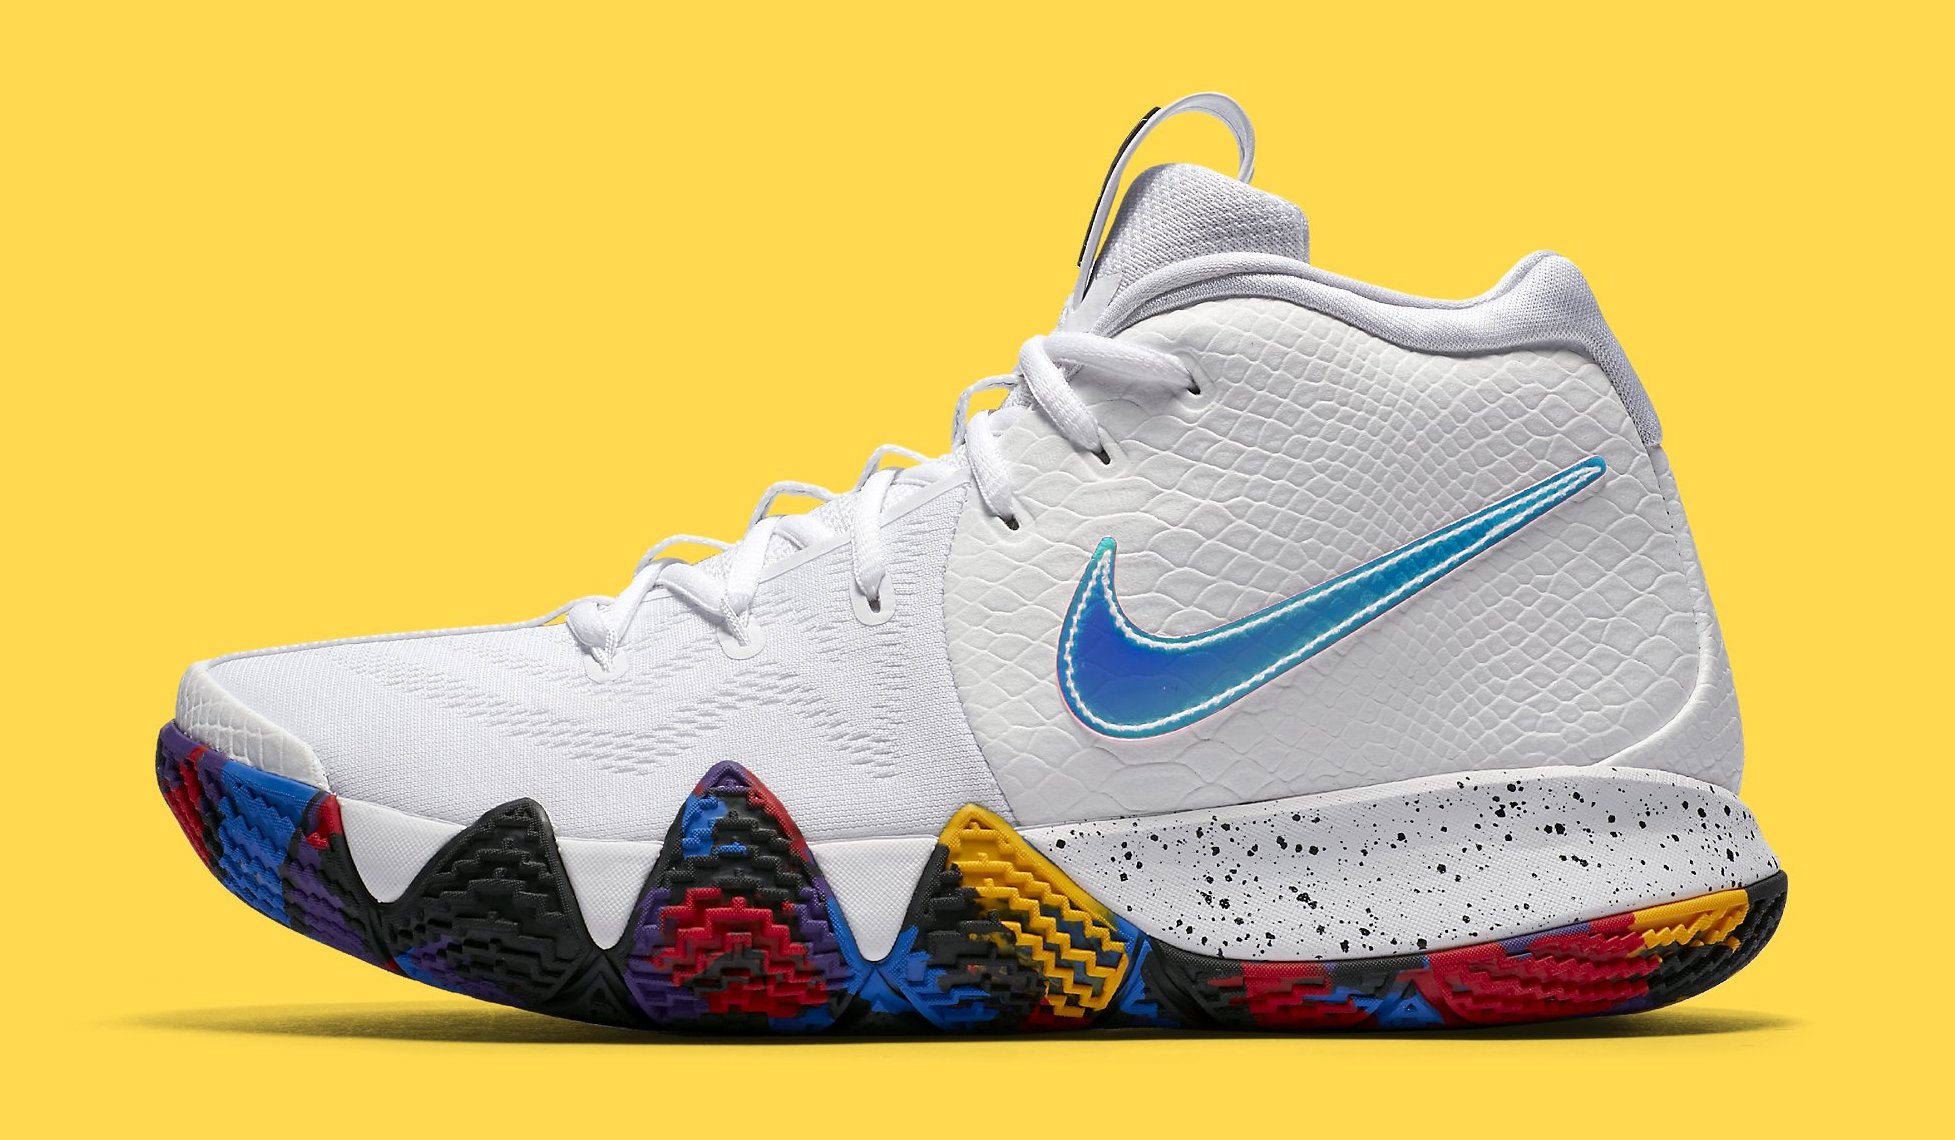 Nike Kyrie 4 &#x27;March Madness&#x27; 943804 104 (Lateral)